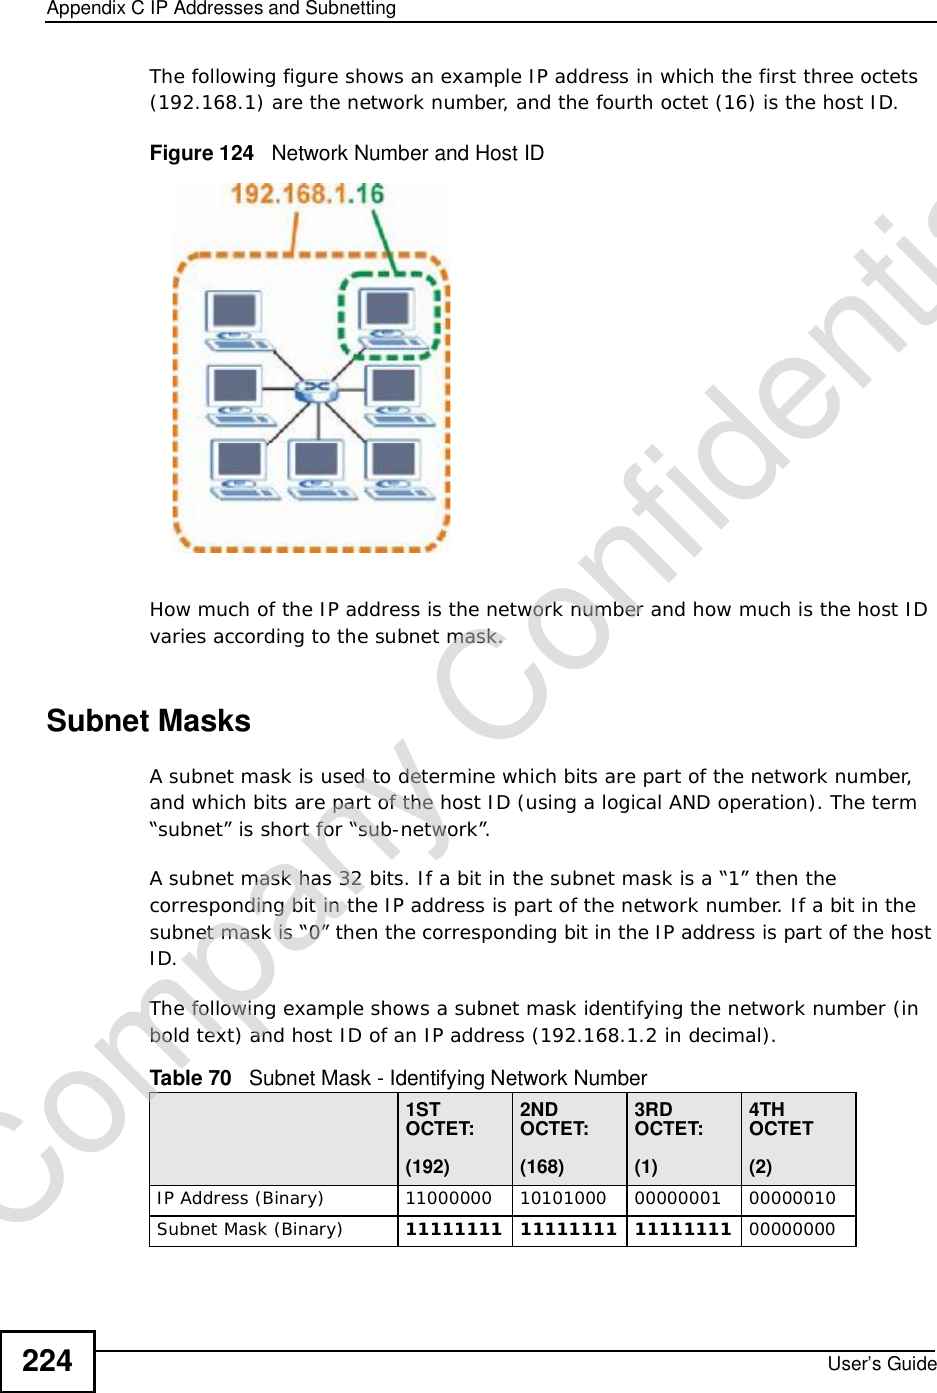 Appendix CIP Addresses and SubnettingUser’s Guide224The following figure shows an example IP address in which the first three octets (192.168.1) are the network number, and the fourth octet (16) is the host ID.Figure 124   Network Number and Host IDHow much of the IP address is the network number and how much is the host ID varies according to the subnet mask. Subnet MasksA subnet mask is used to determine which bits are part of the network number, and which bits are part of the host ID (using a logical AND operation). The term “subnet” is short for “sub-network”.A subnet mask has 32 bits. If a bit in the subnet mask is a “1” then the corresponding bit in the IP address is part of the network number. If a bit in the subnet mask is “0” then the corresponding bit in the IP address is part of the host ID. The following example shows a subnet mask identifying the network number (in bold text) and host ID of an IP address (192.168.1.2 in decimal).Table 70   Subnet Mask - Identifying Network Number1STOCTET:(192)2NDOCTET:(168)3RDOCTET:(1)4TH OCTET(2)IP Address (Binary)11000000101010000000000100000010Subnet Mask (Binary) 111111111111111111111111 00000000Company Confidential